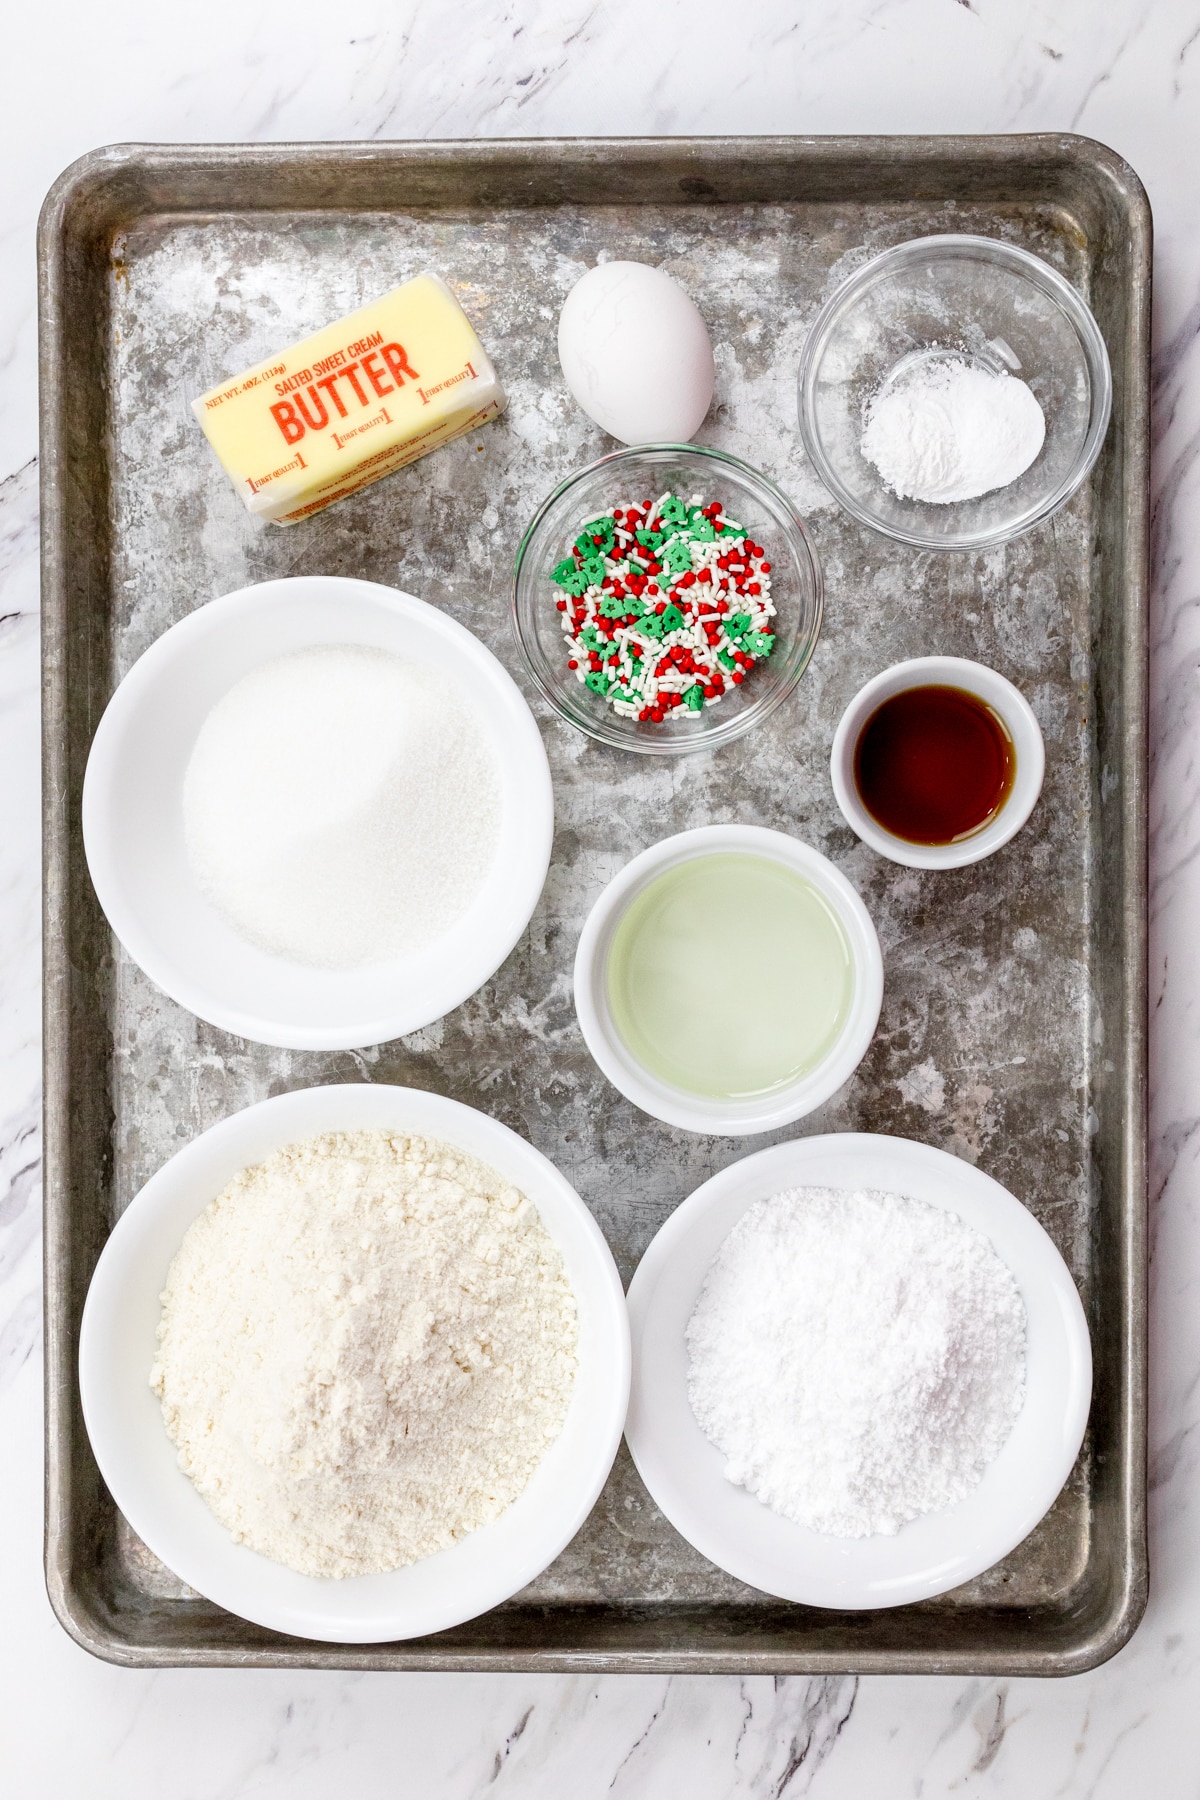 Top view of ingredients needed to make Christmas Sugar Cookies in small bowls on a baking tray.